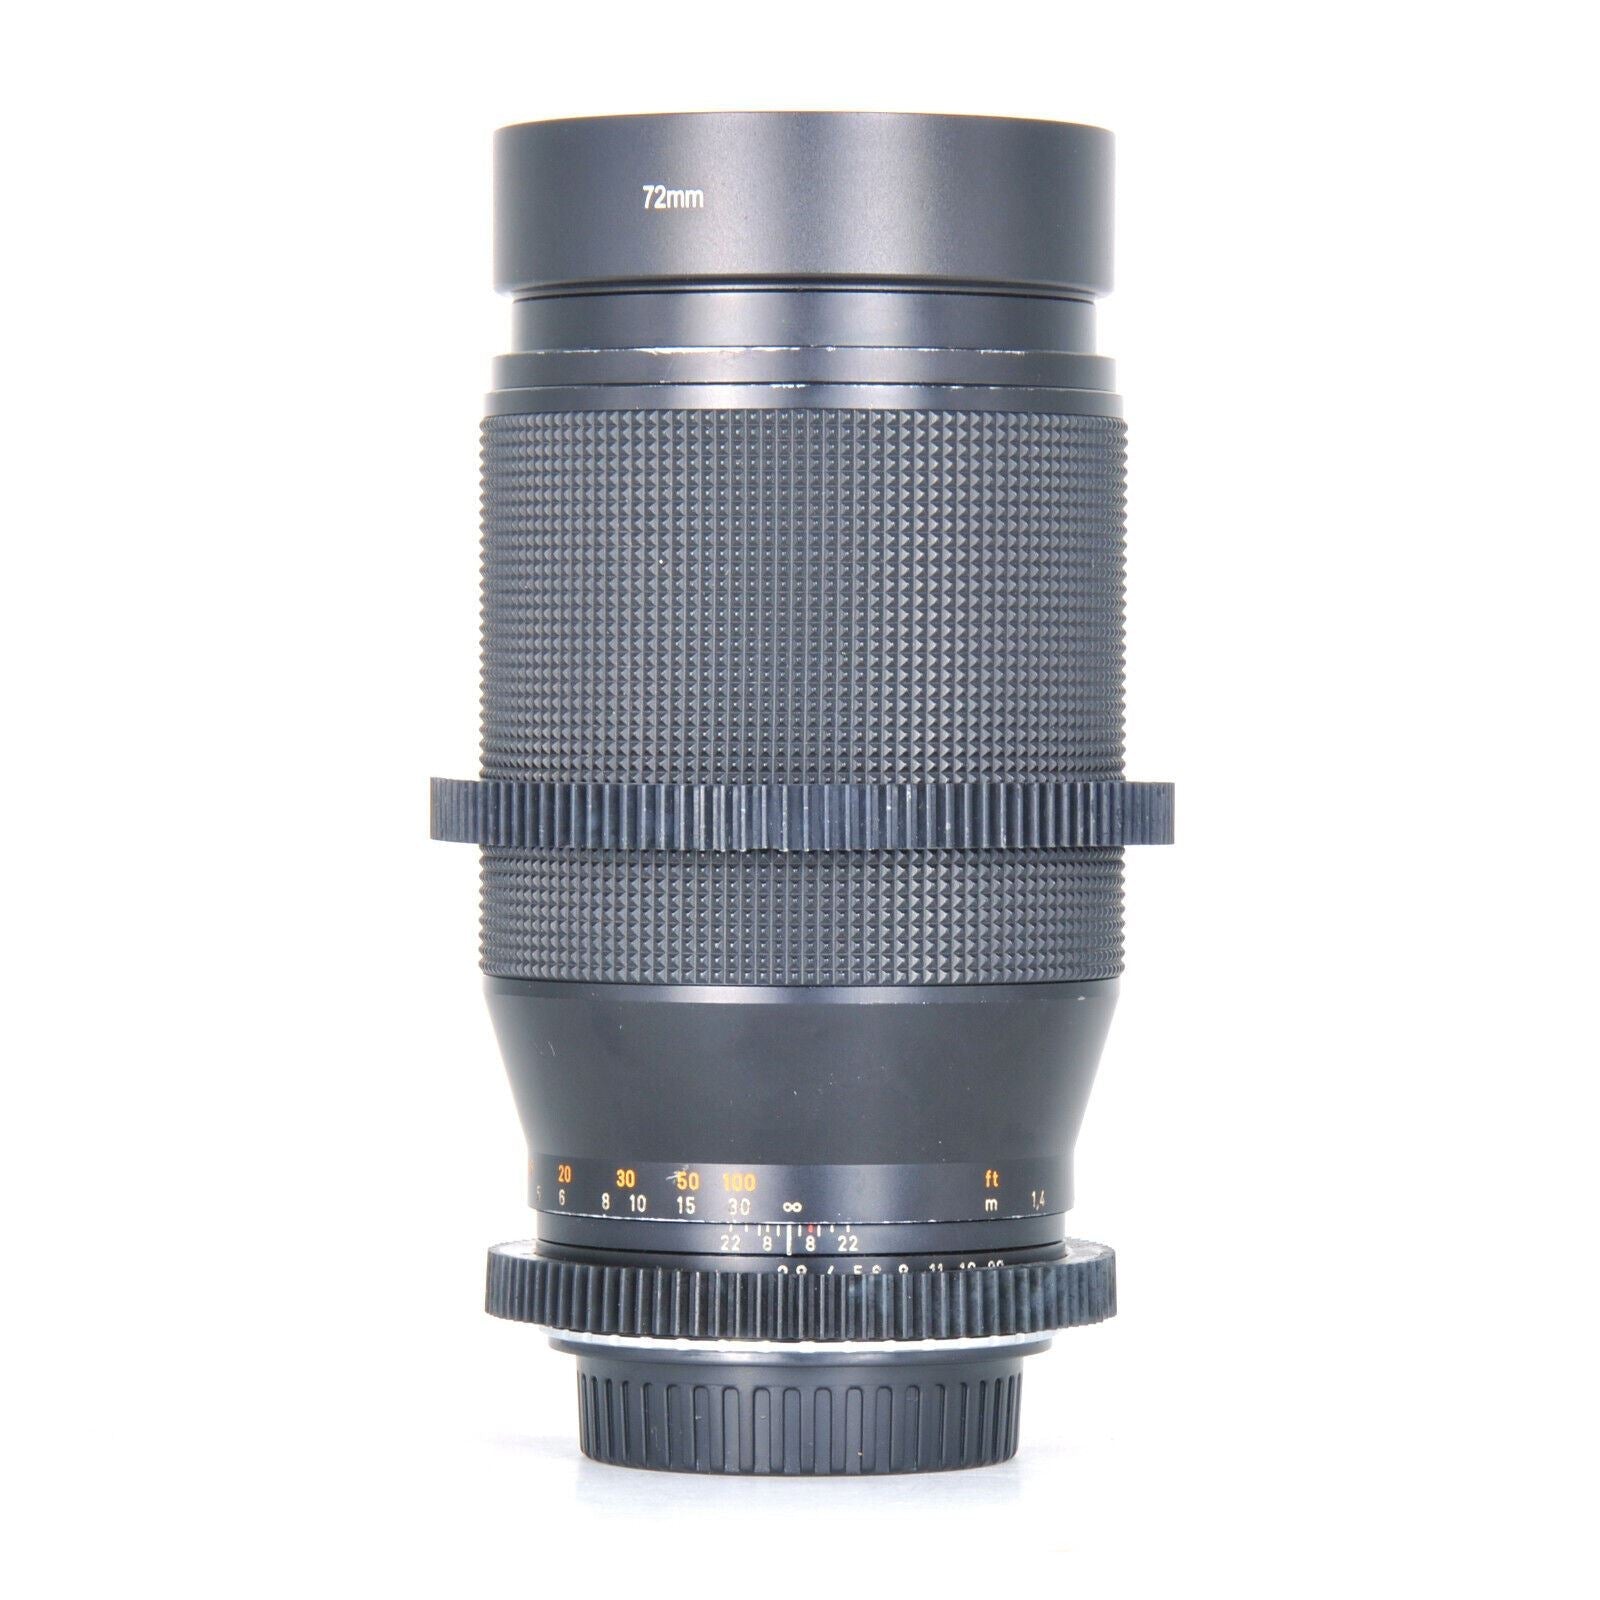 Cine Modded Carl Zeiss Sonnar T* 180mm F2.8 Prime Lens For Canon EF Mount! - TerPhoto Store